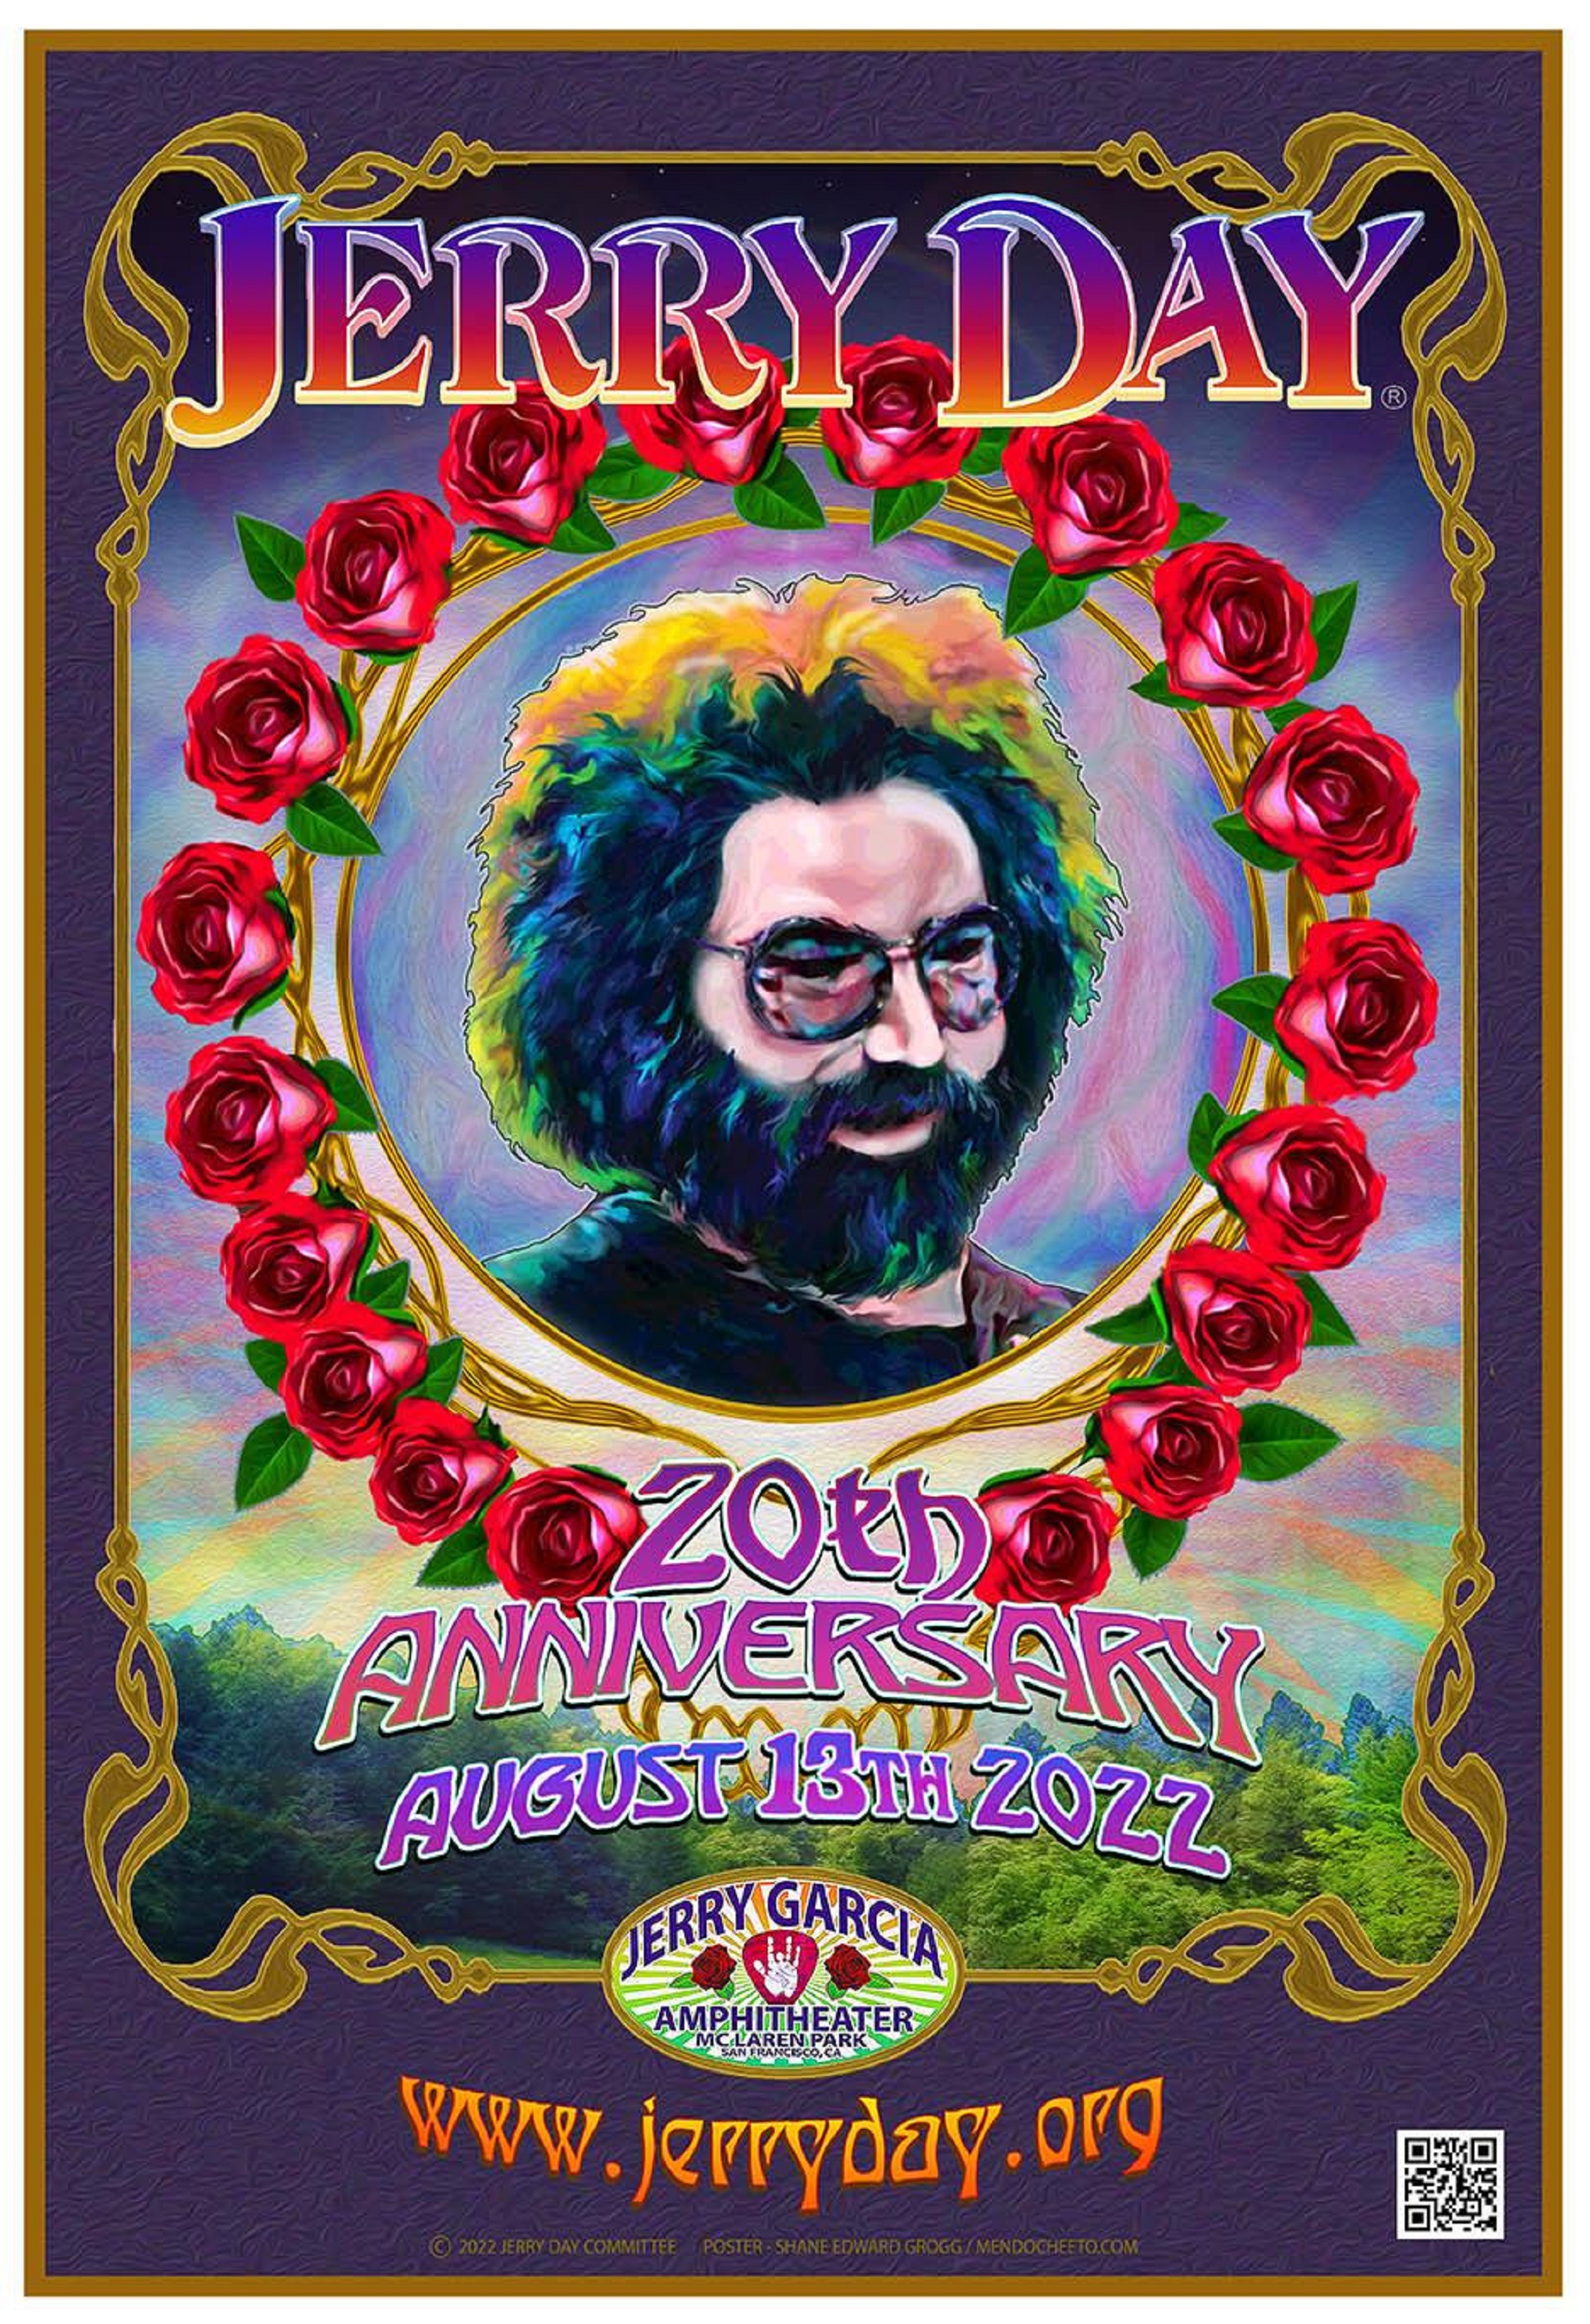 Jerry Day 2022 - Initial Artist Announcements